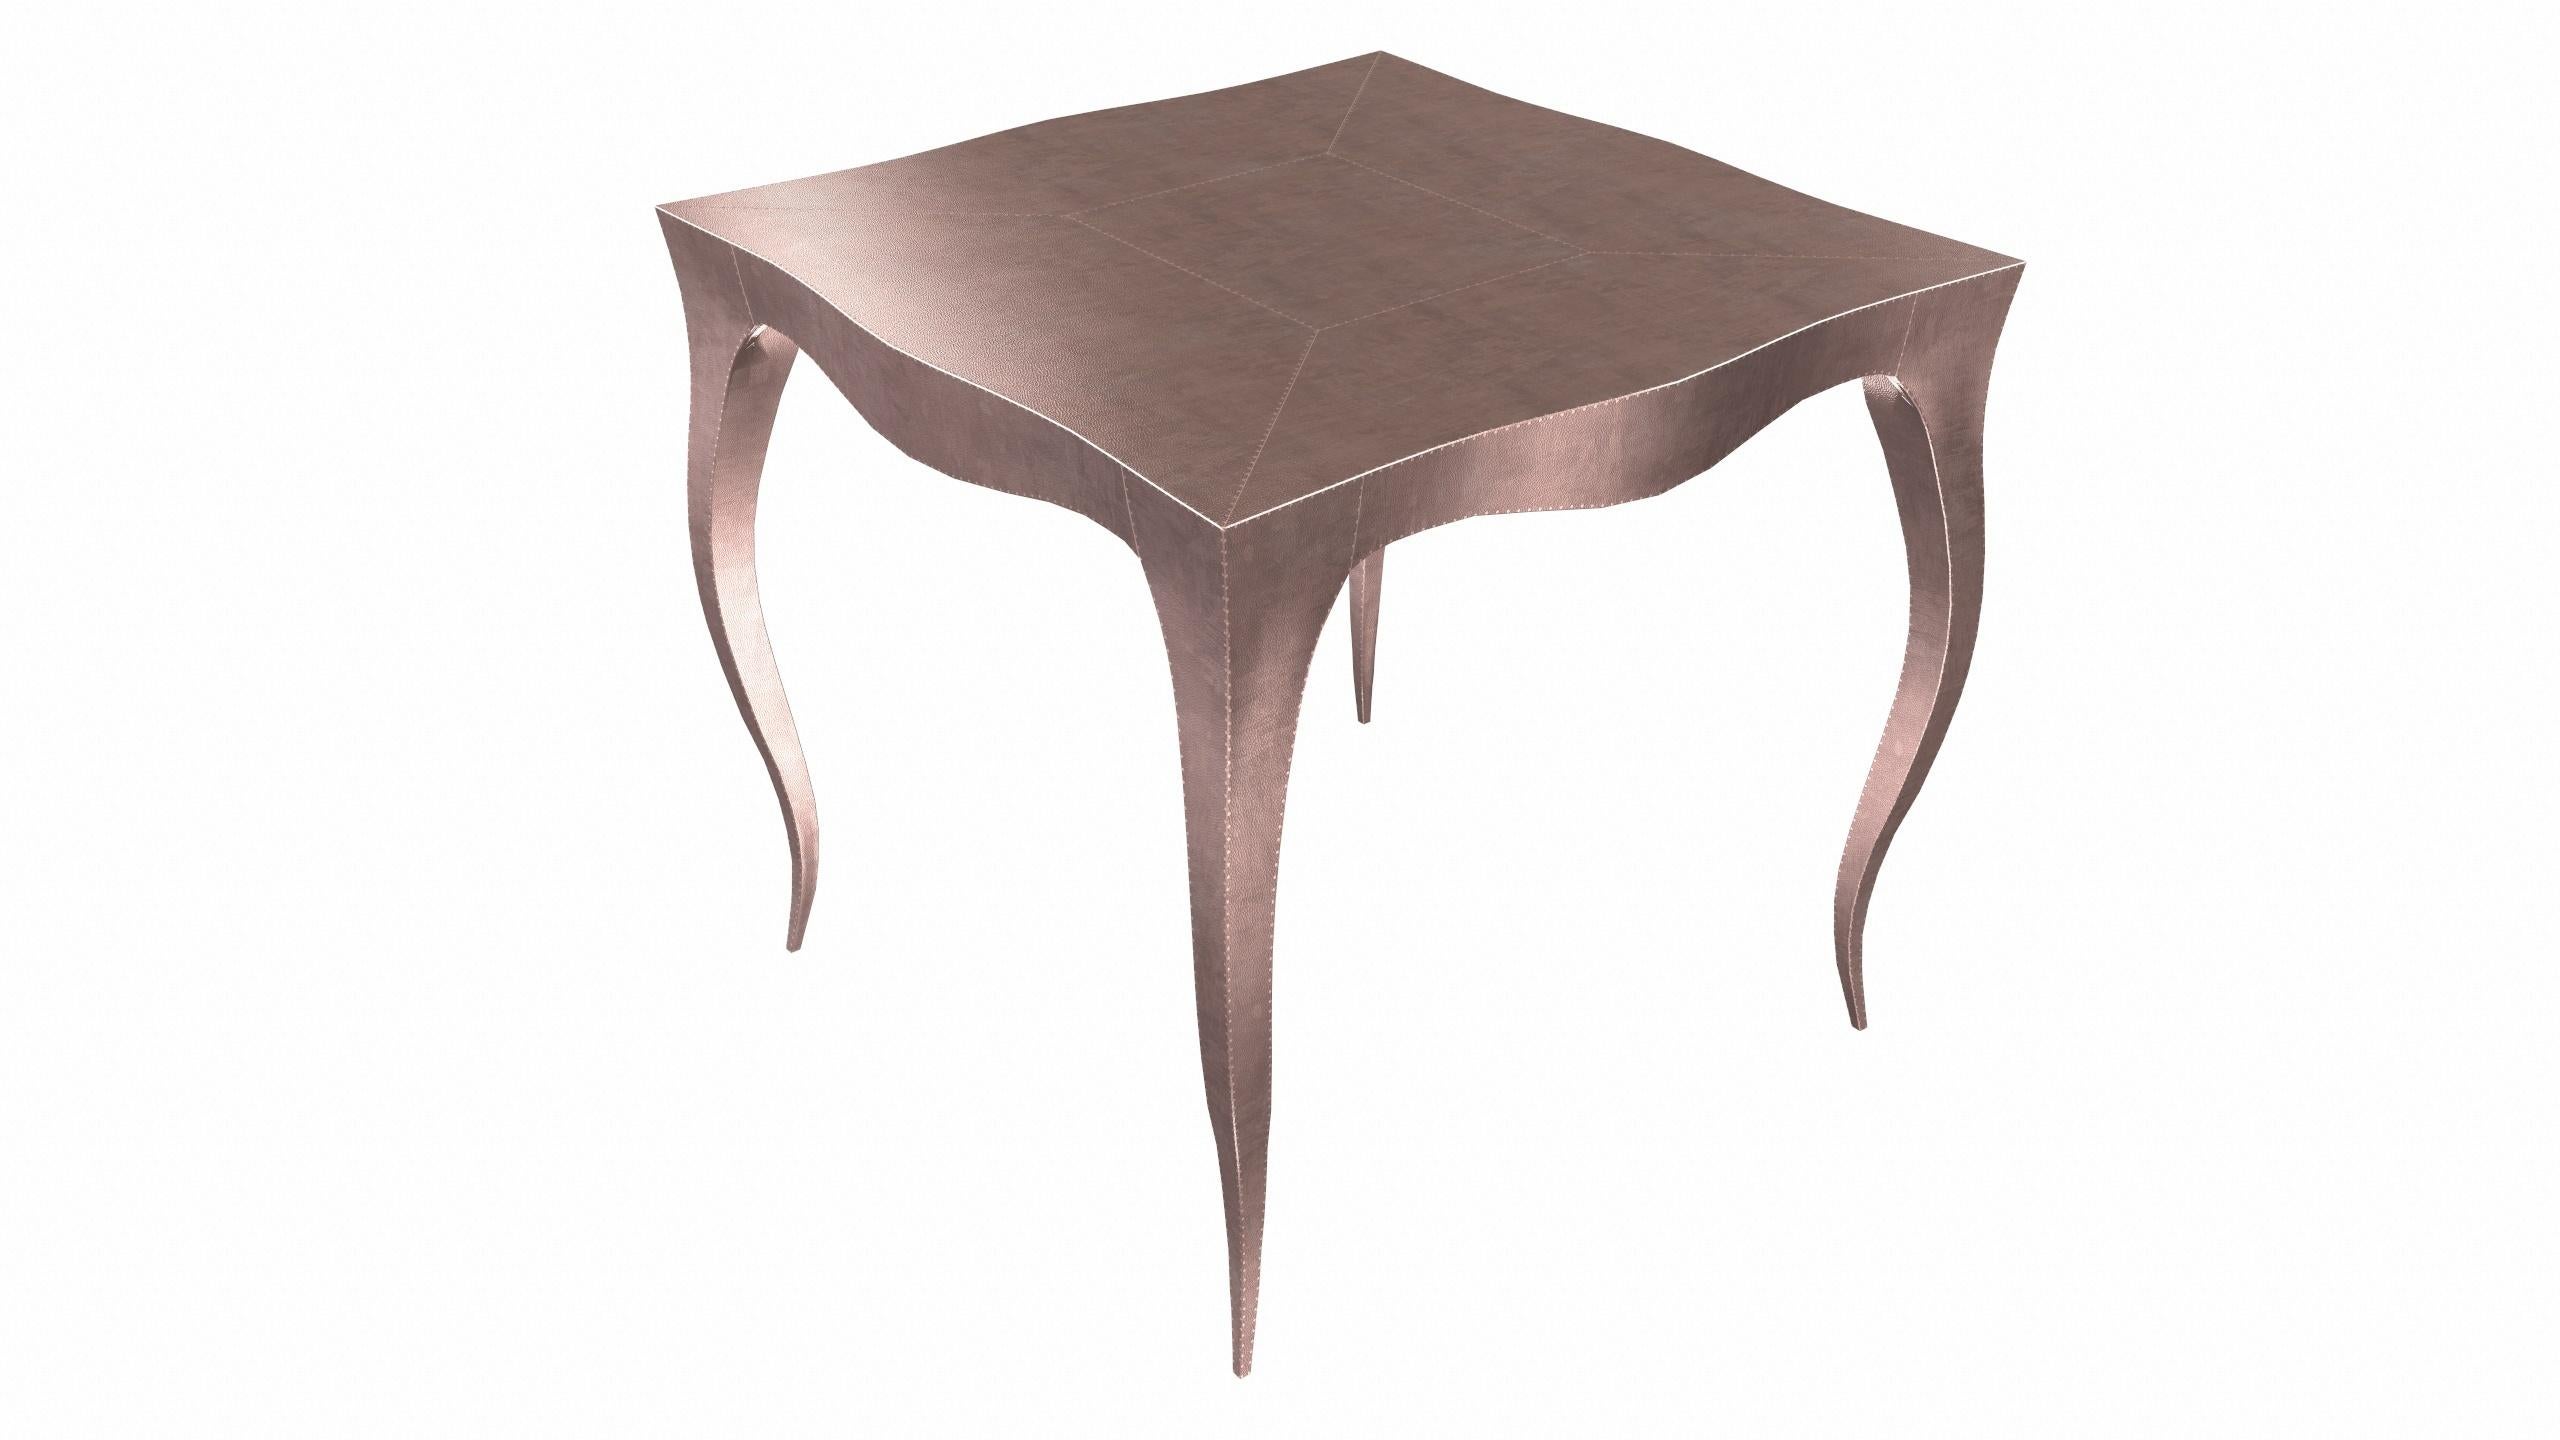 Contemporary Louise Art Deco Industrial and Work Tables Mid. Hammered Copper by Paul Mathieu For Sale